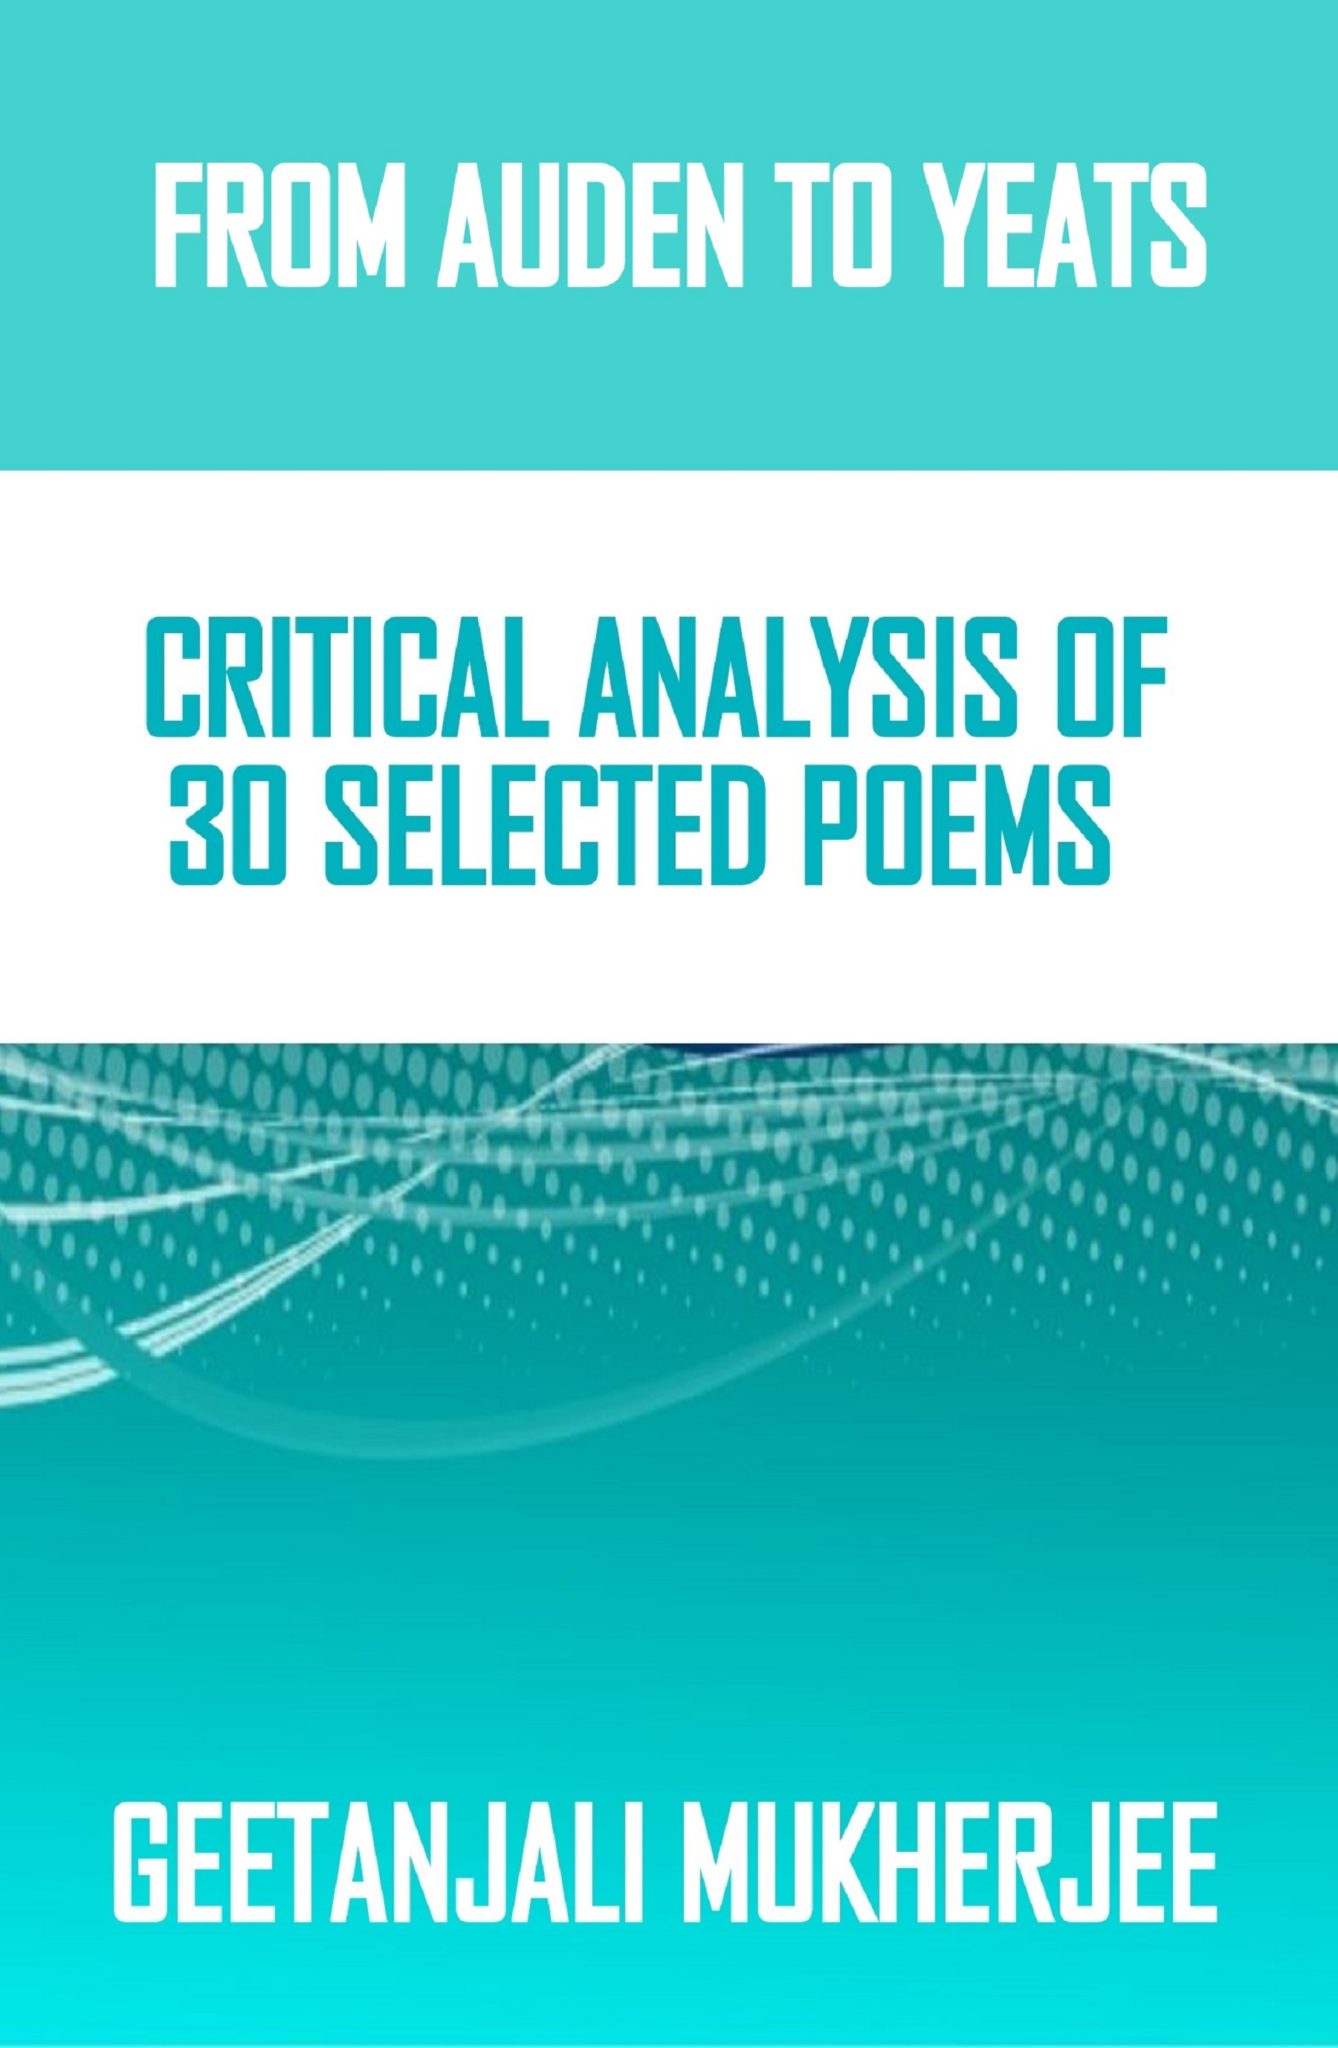 FREE: From Auden to Yeats: Critical Analysis of 30 Selected Poem by Geetanjali Mukherjee